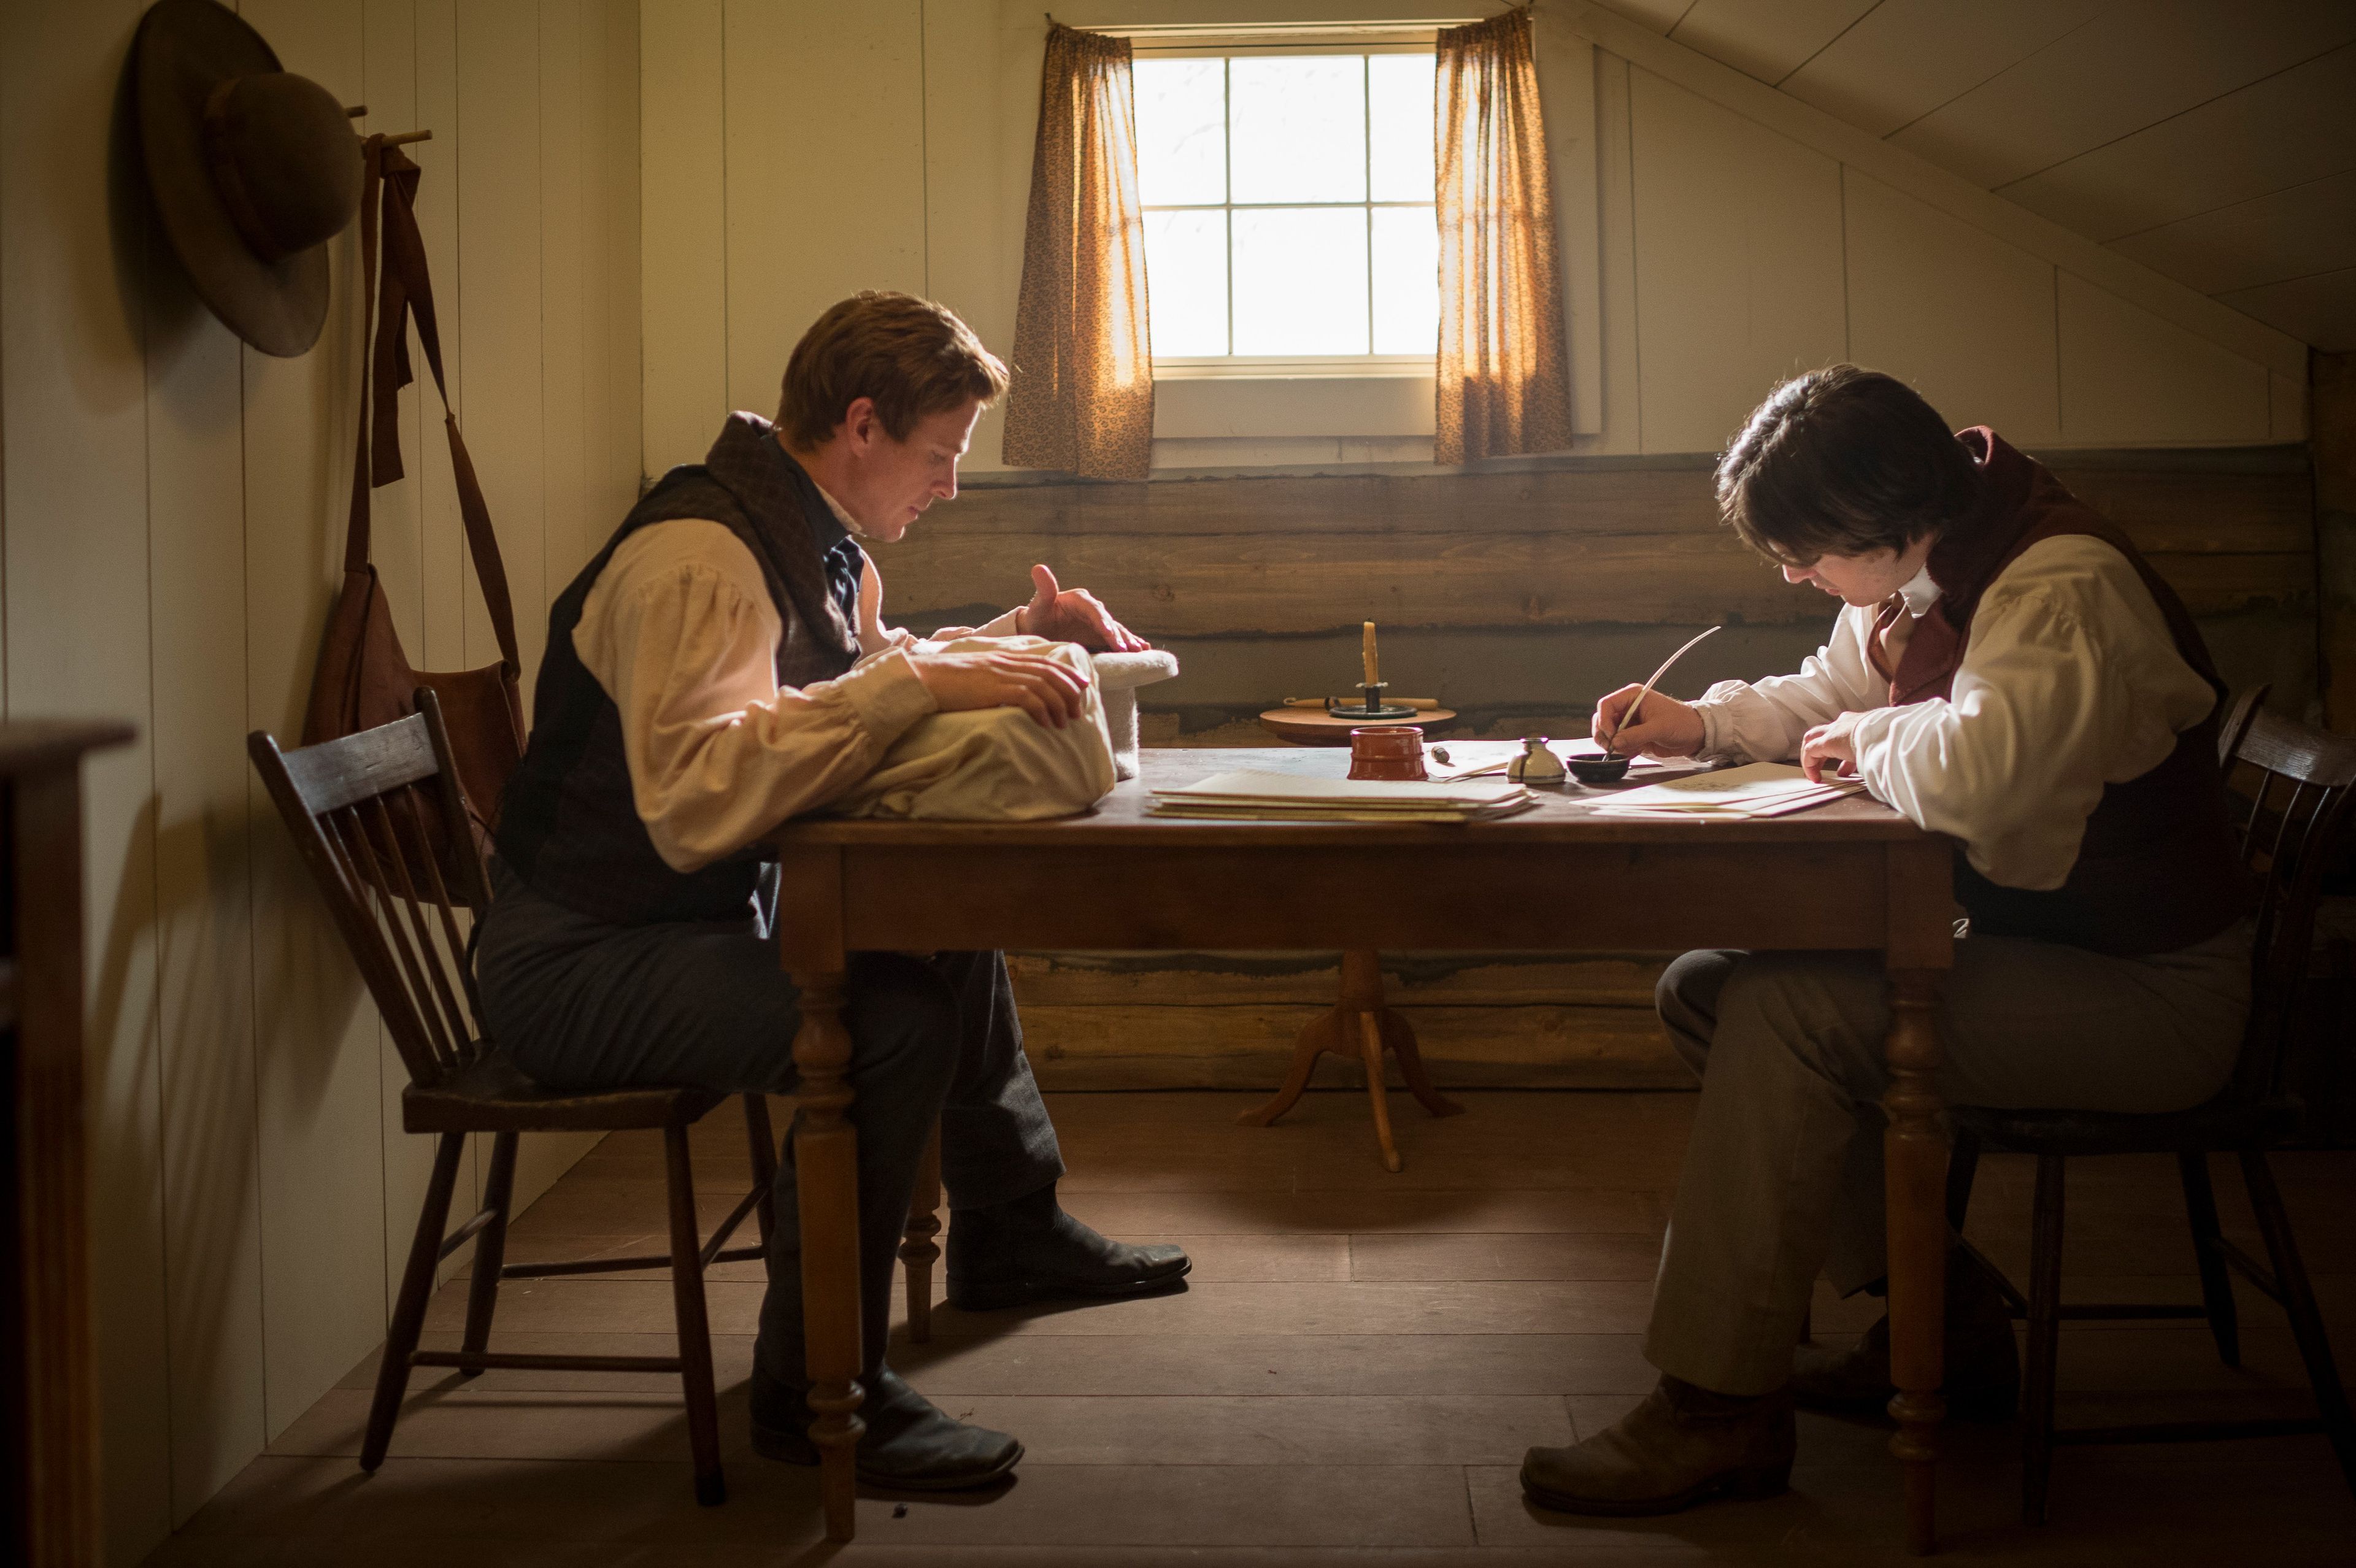 An image from the video “A Day for the Eternities” depicting Joseph Smith translating the Book of Mormon, dictating the text to his scribe, Oliver Cowdery.